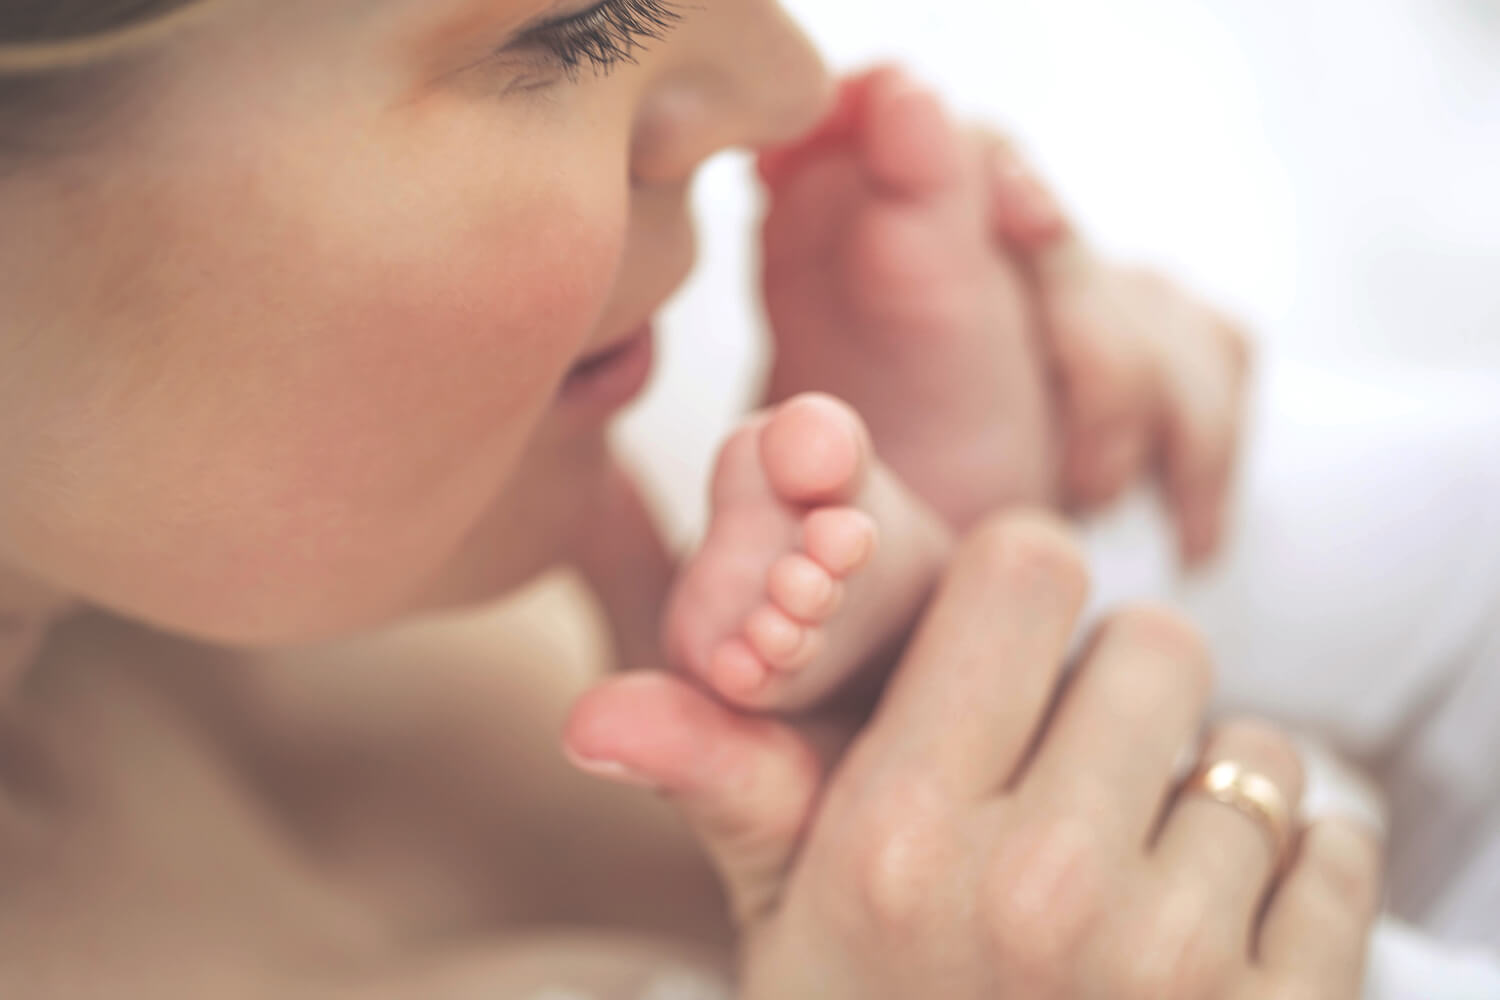 9 Steps To Take To Cope With Your Child’s Birth Defect